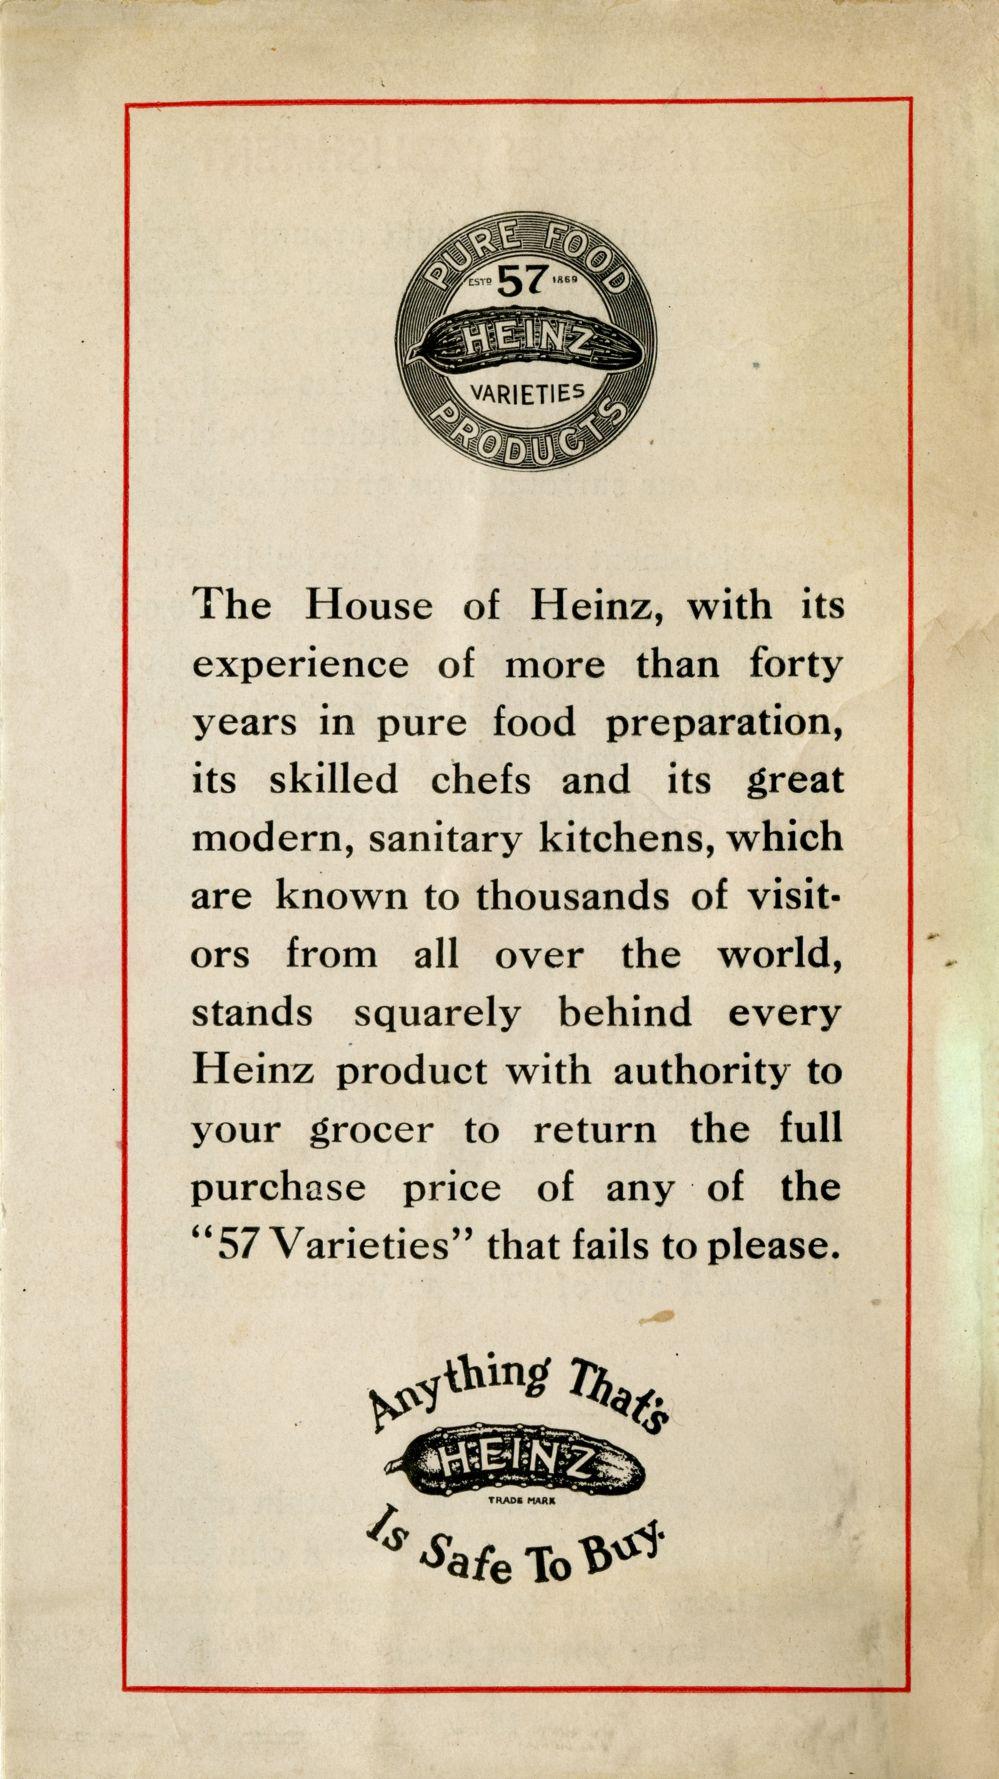 The House of Heinz, with its experience of more than forty years in pure food preparation, its skilled chefs and its great modern, sanitary kitchens, which are known to thousands of